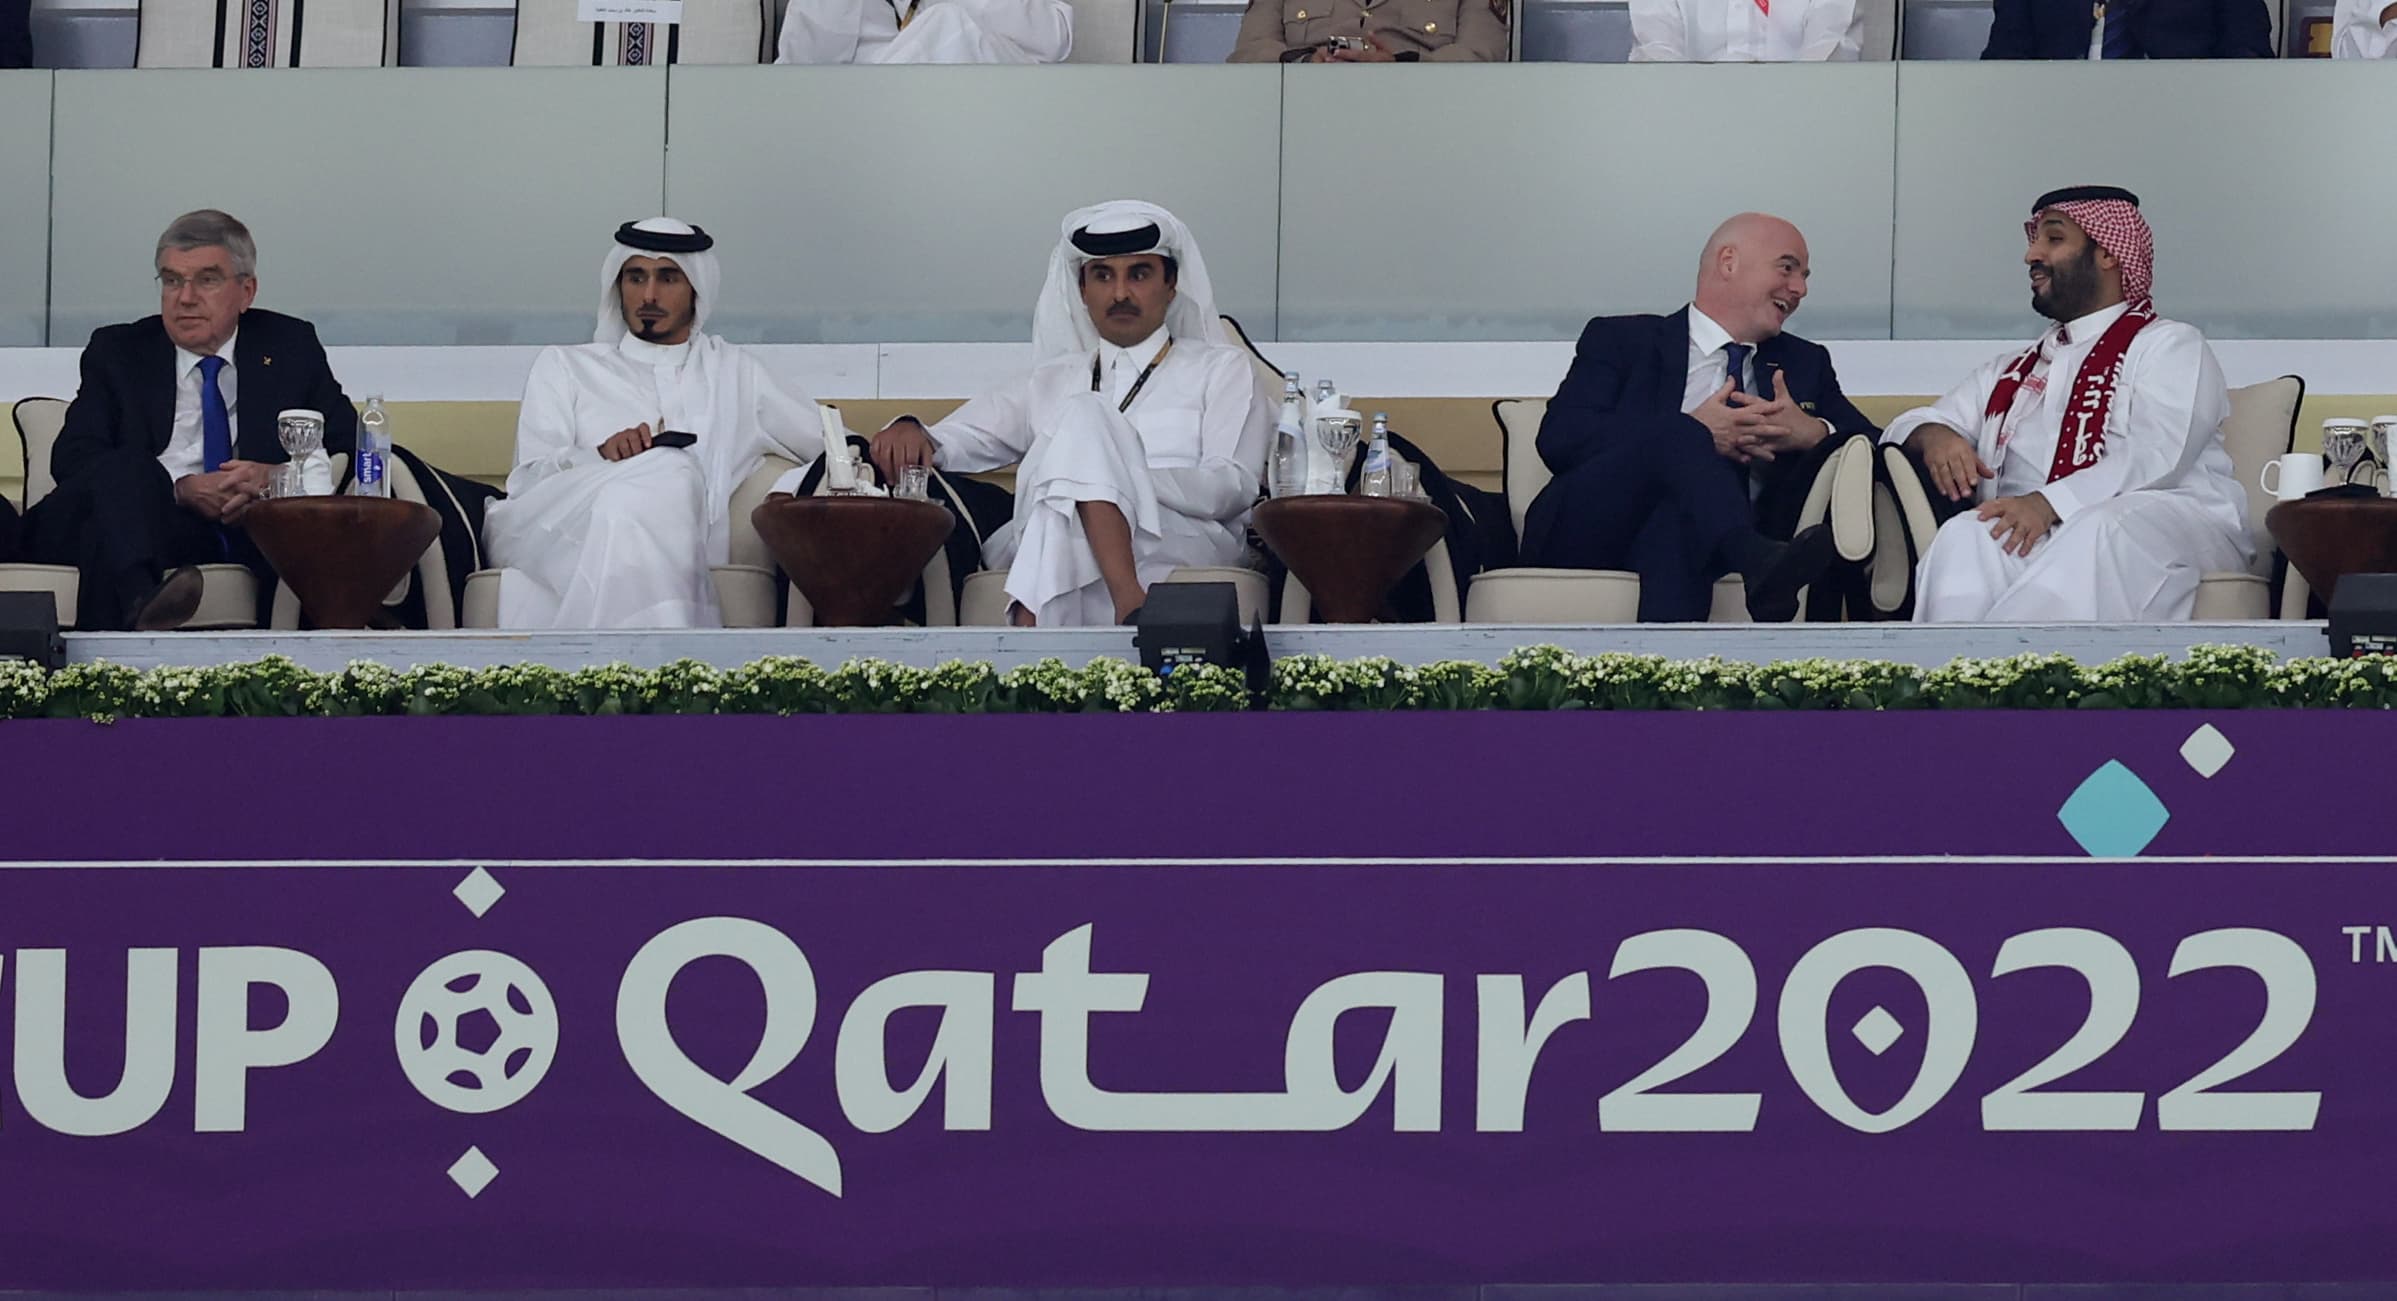 2022 World Cup set to kick off in Qatar with no beer and plenty of critics